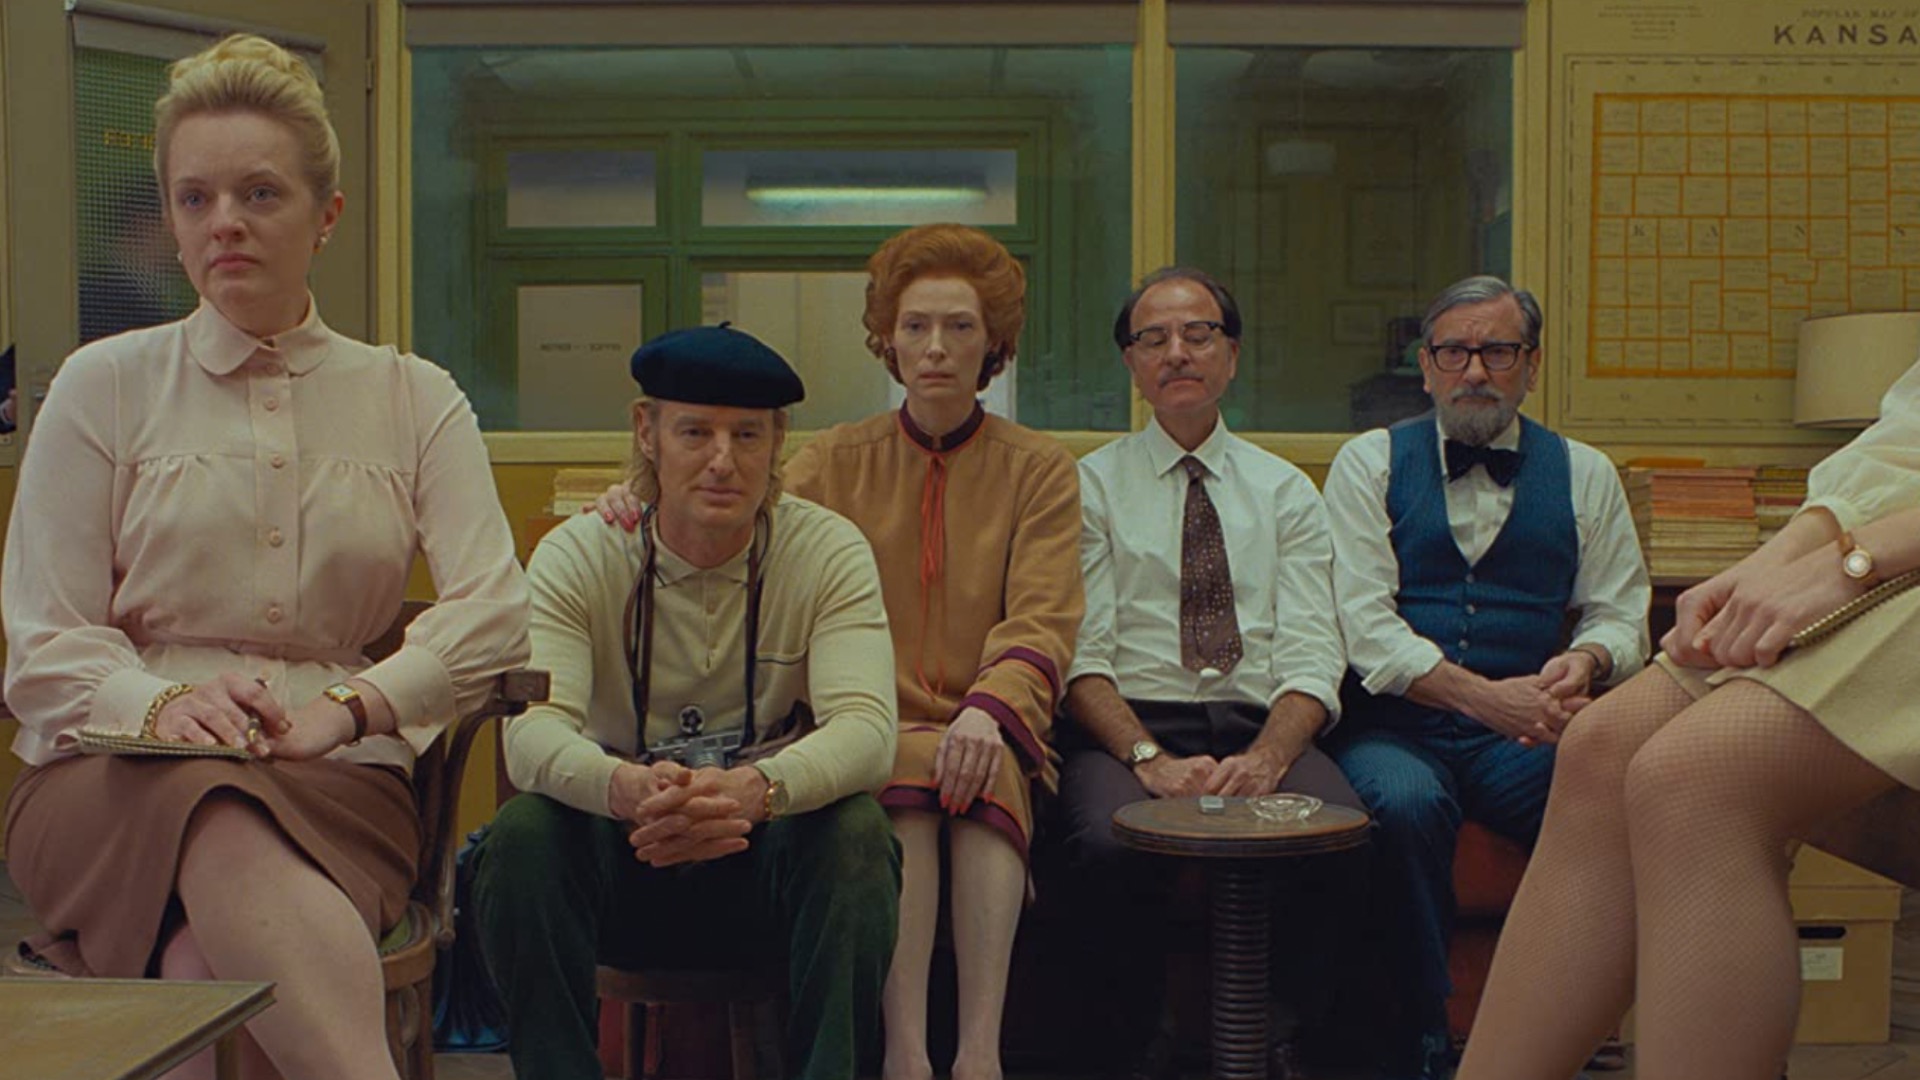 TikTokers Are Filming Daily Activities Like Wes Anderson Movies